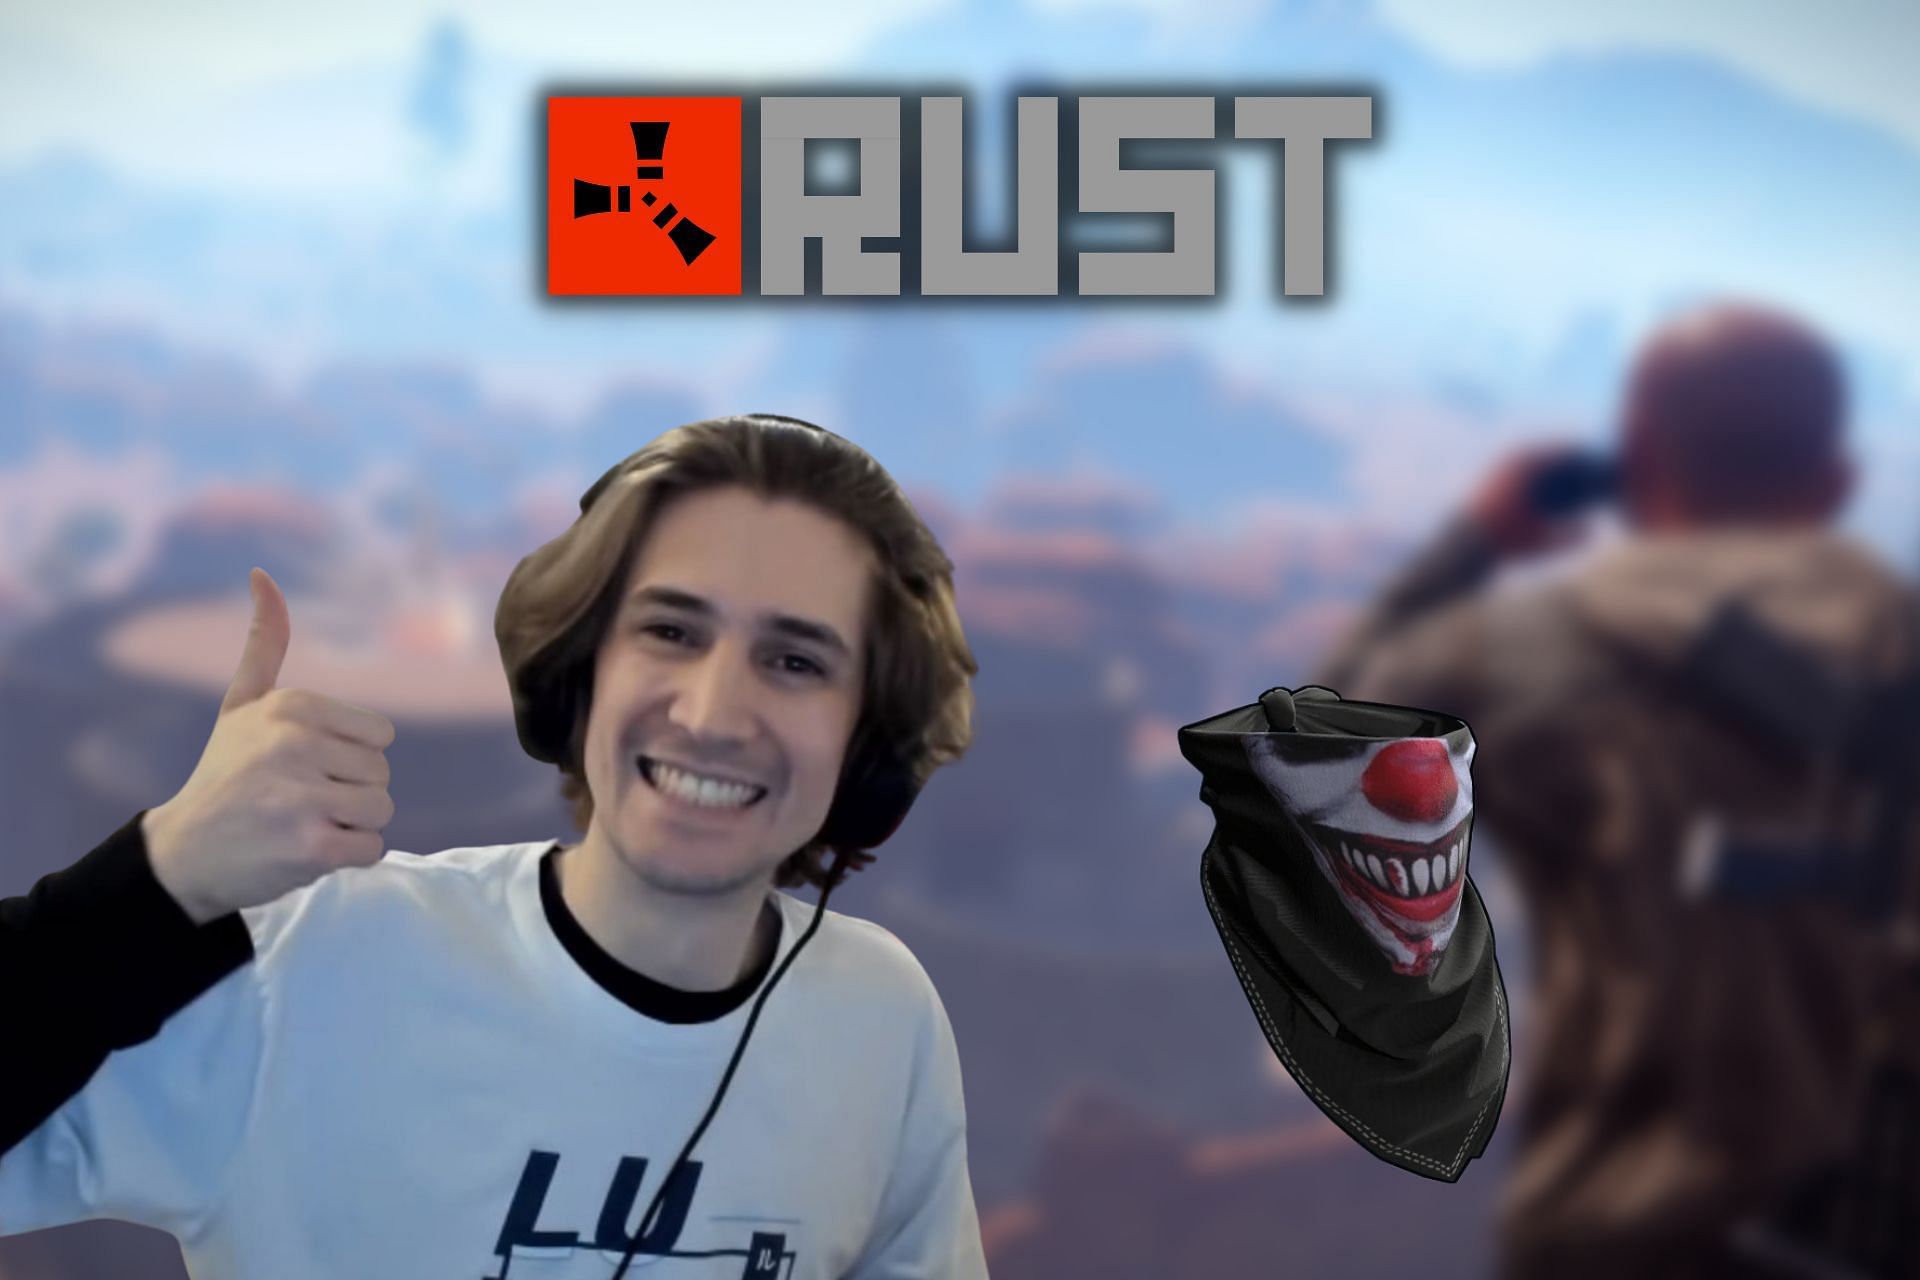 xQc dropped a cool grand on cosmetics just for the Rust event (Image via Sportskeeda)